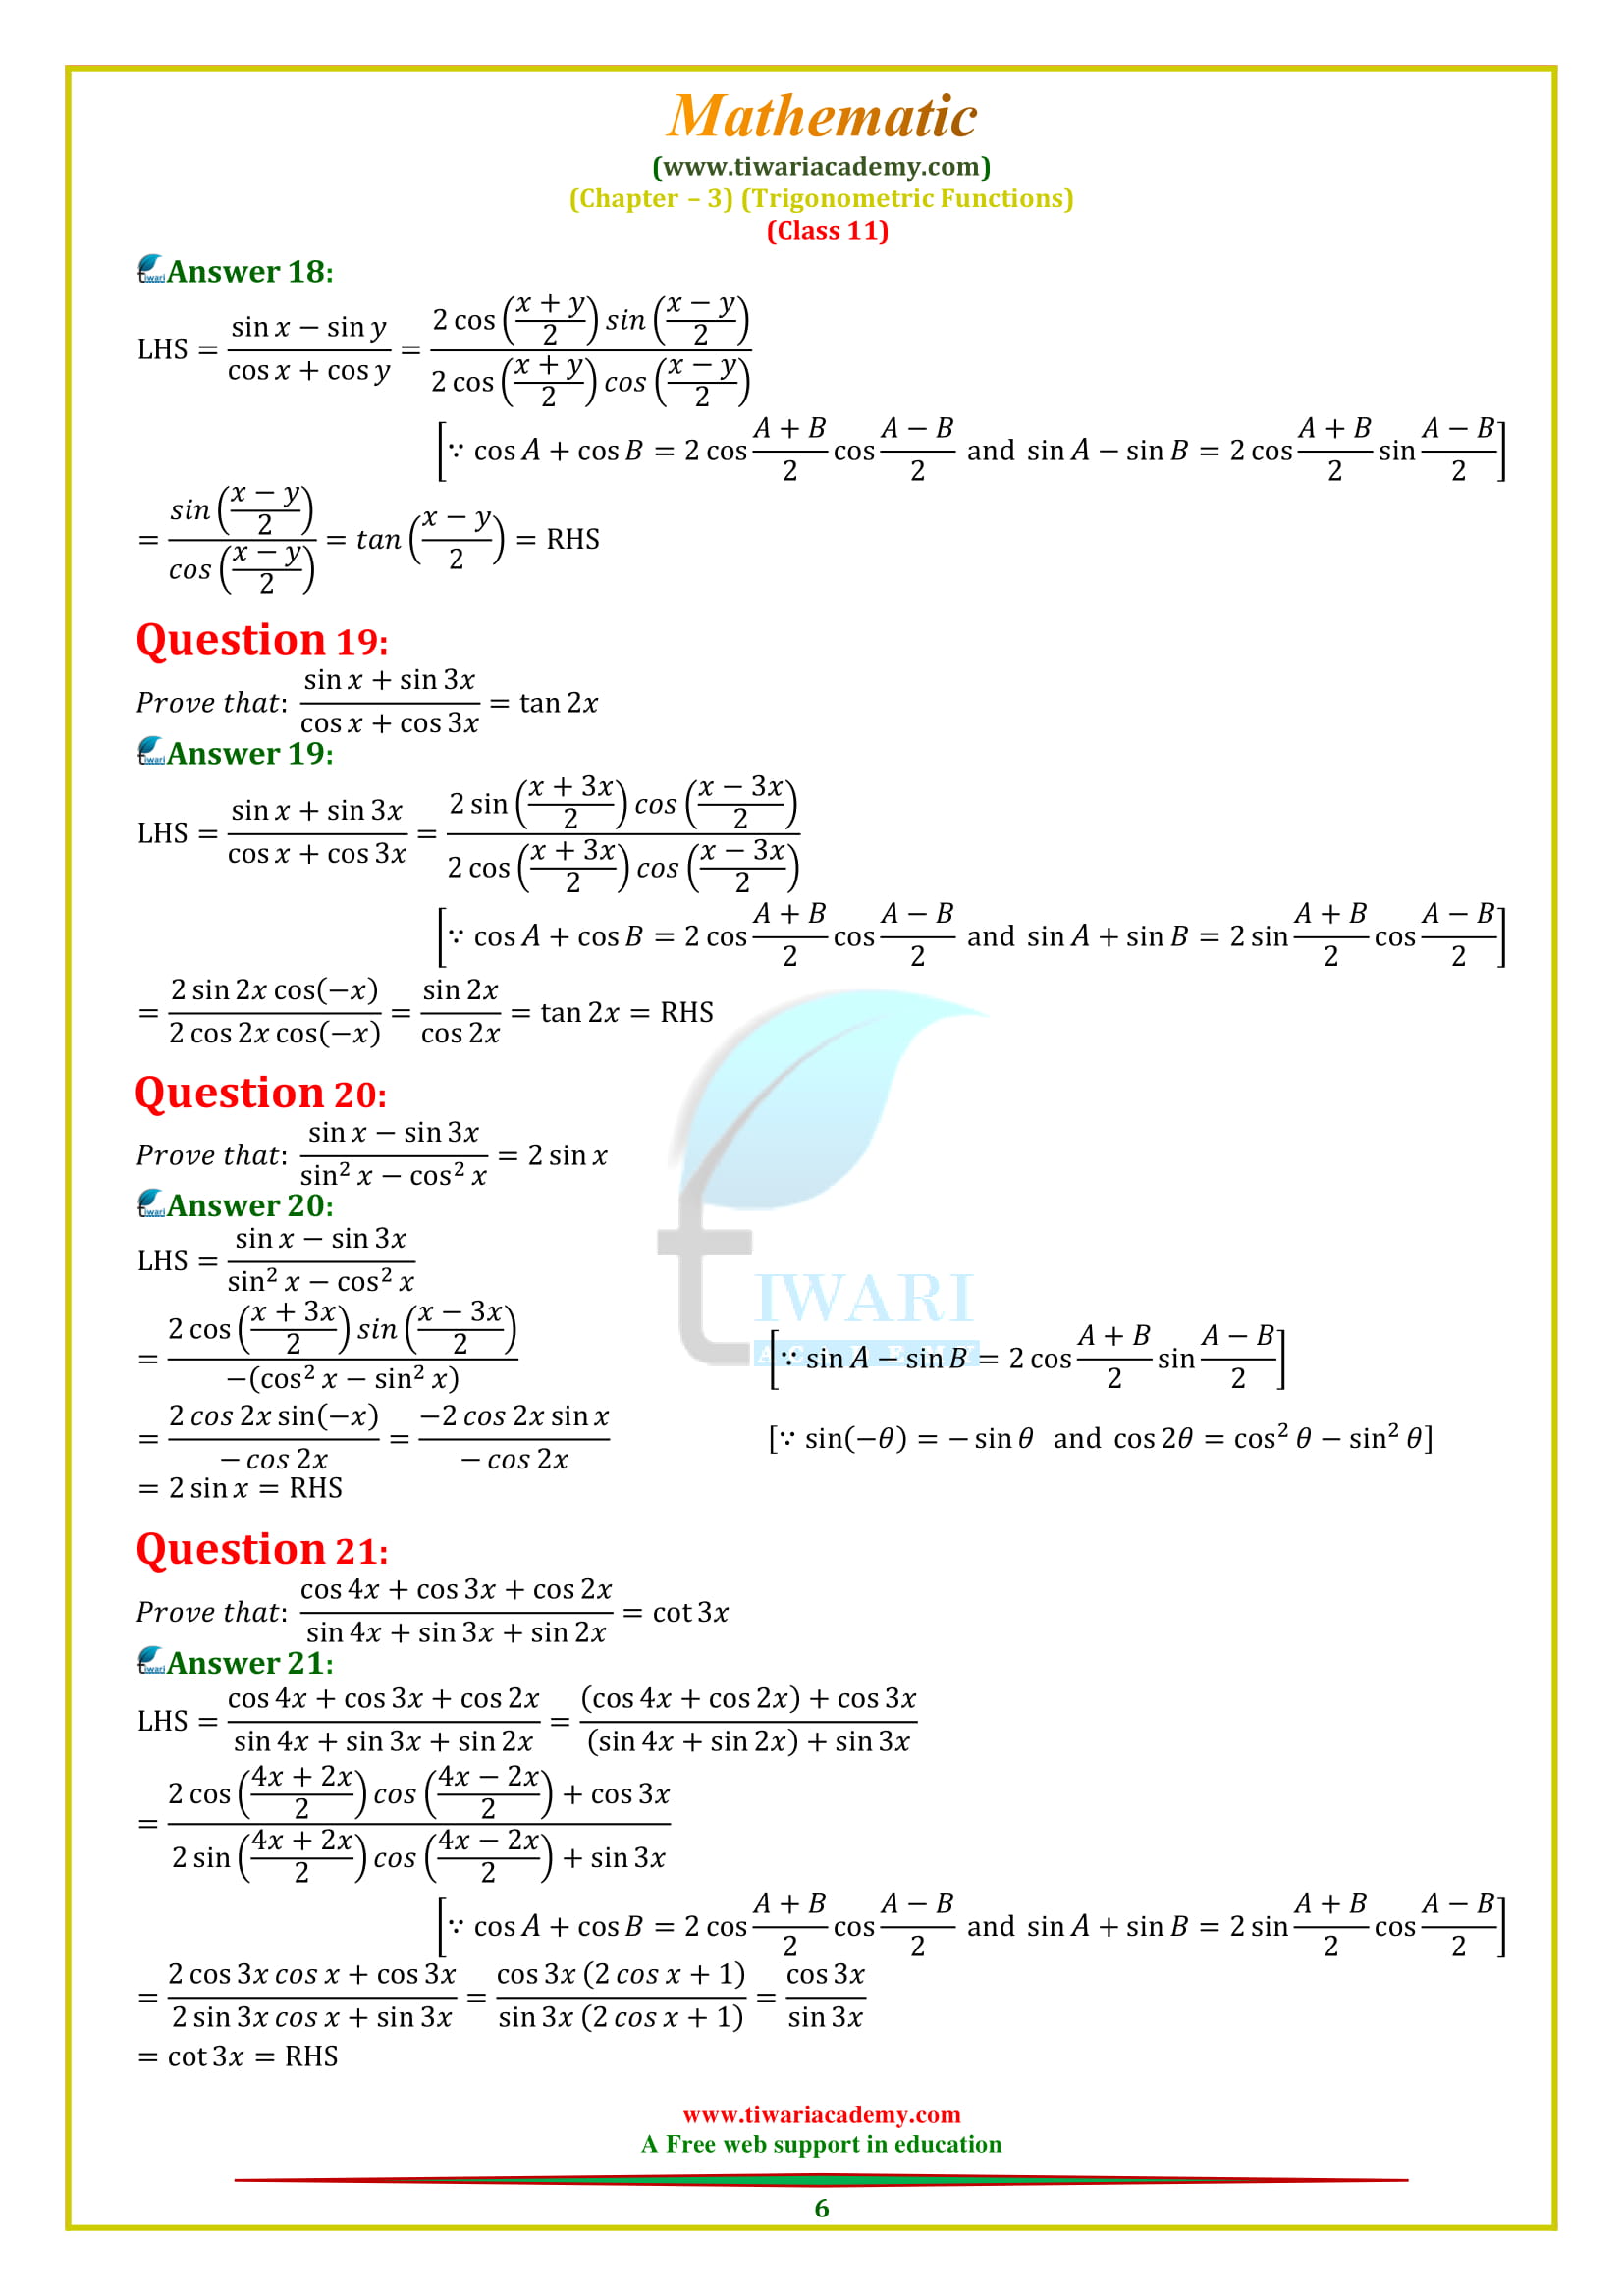 11 Maths Chapter 3 Exercise 3.3 solutions Questions 15, 16, 17, 18, 19, 20.